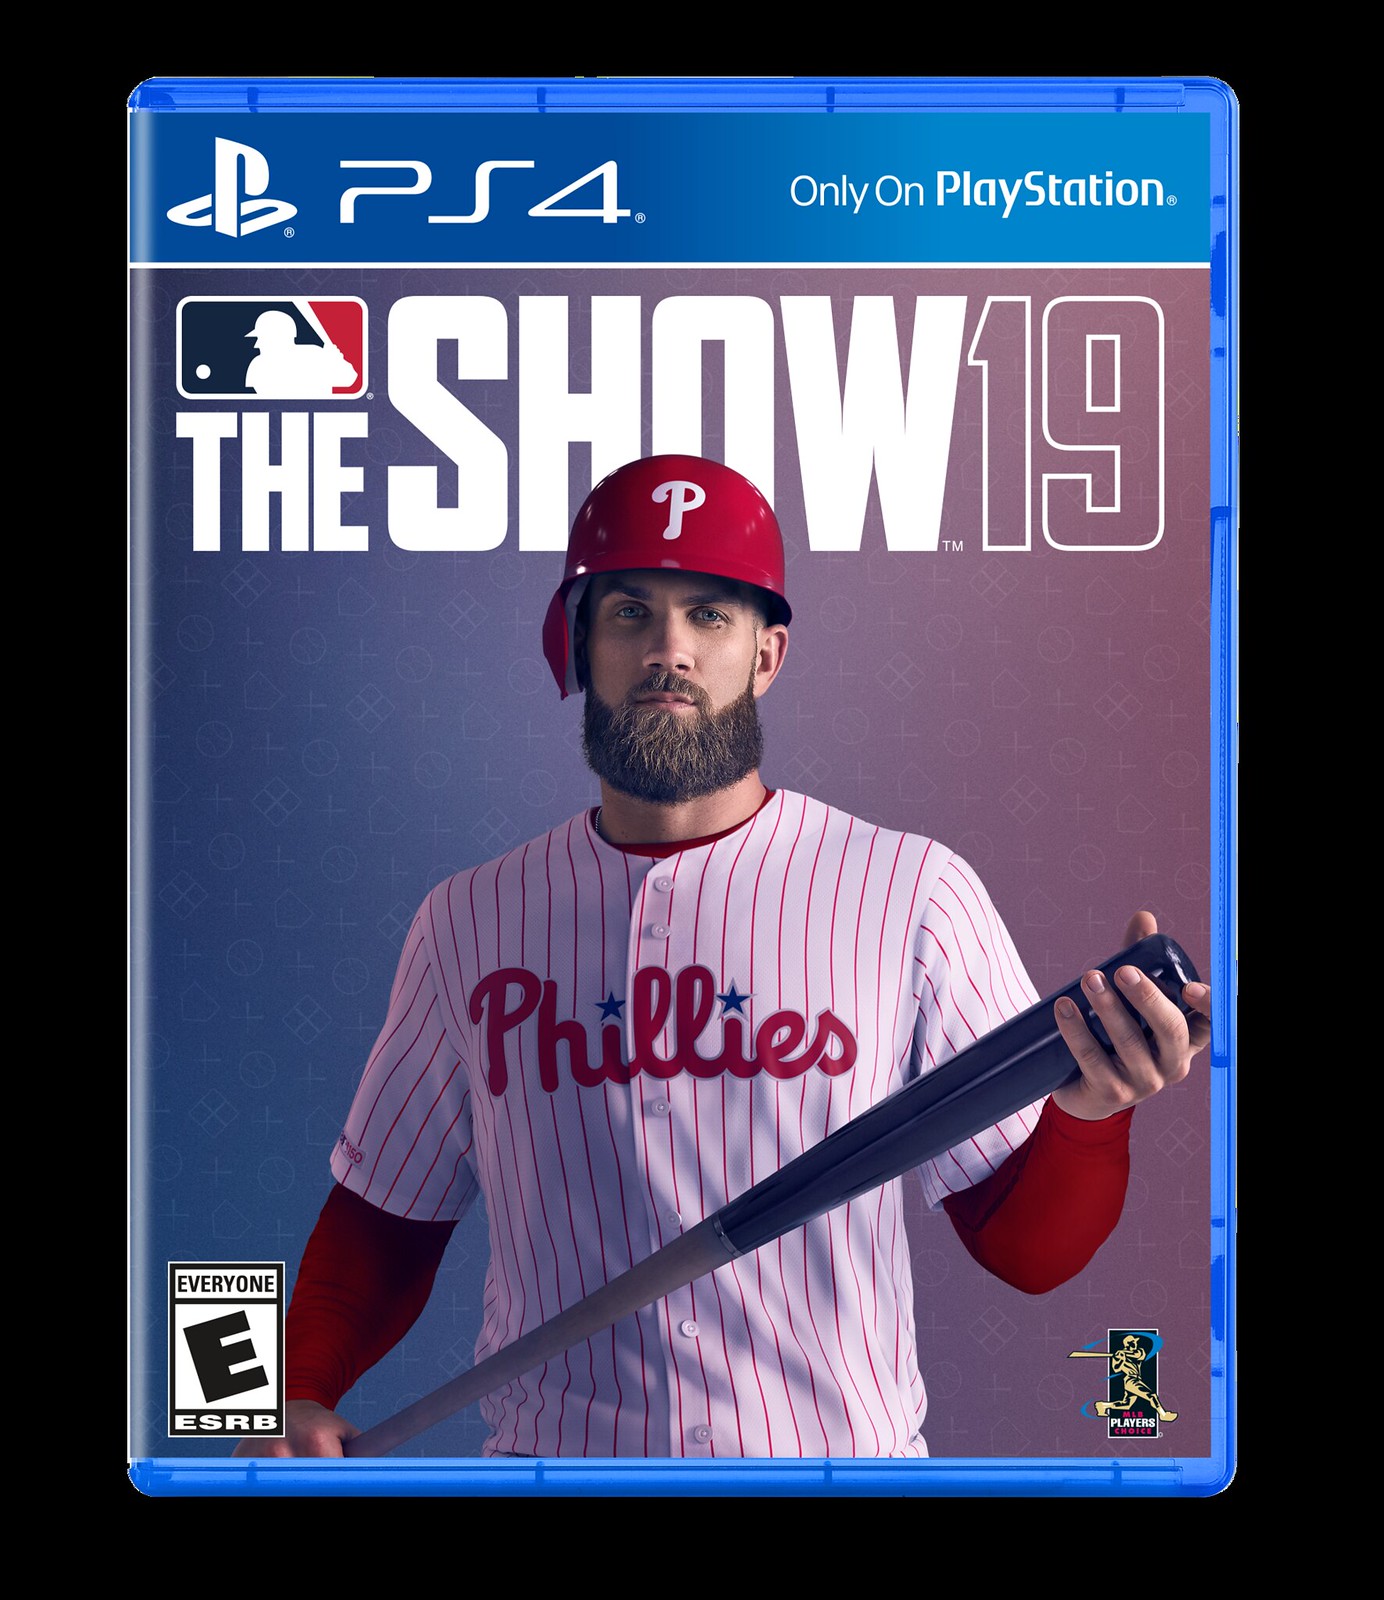 Bryce Harper Joins Phillies, Final MLB The Show 19 Box Art Revealed –  PlayStation.Blog